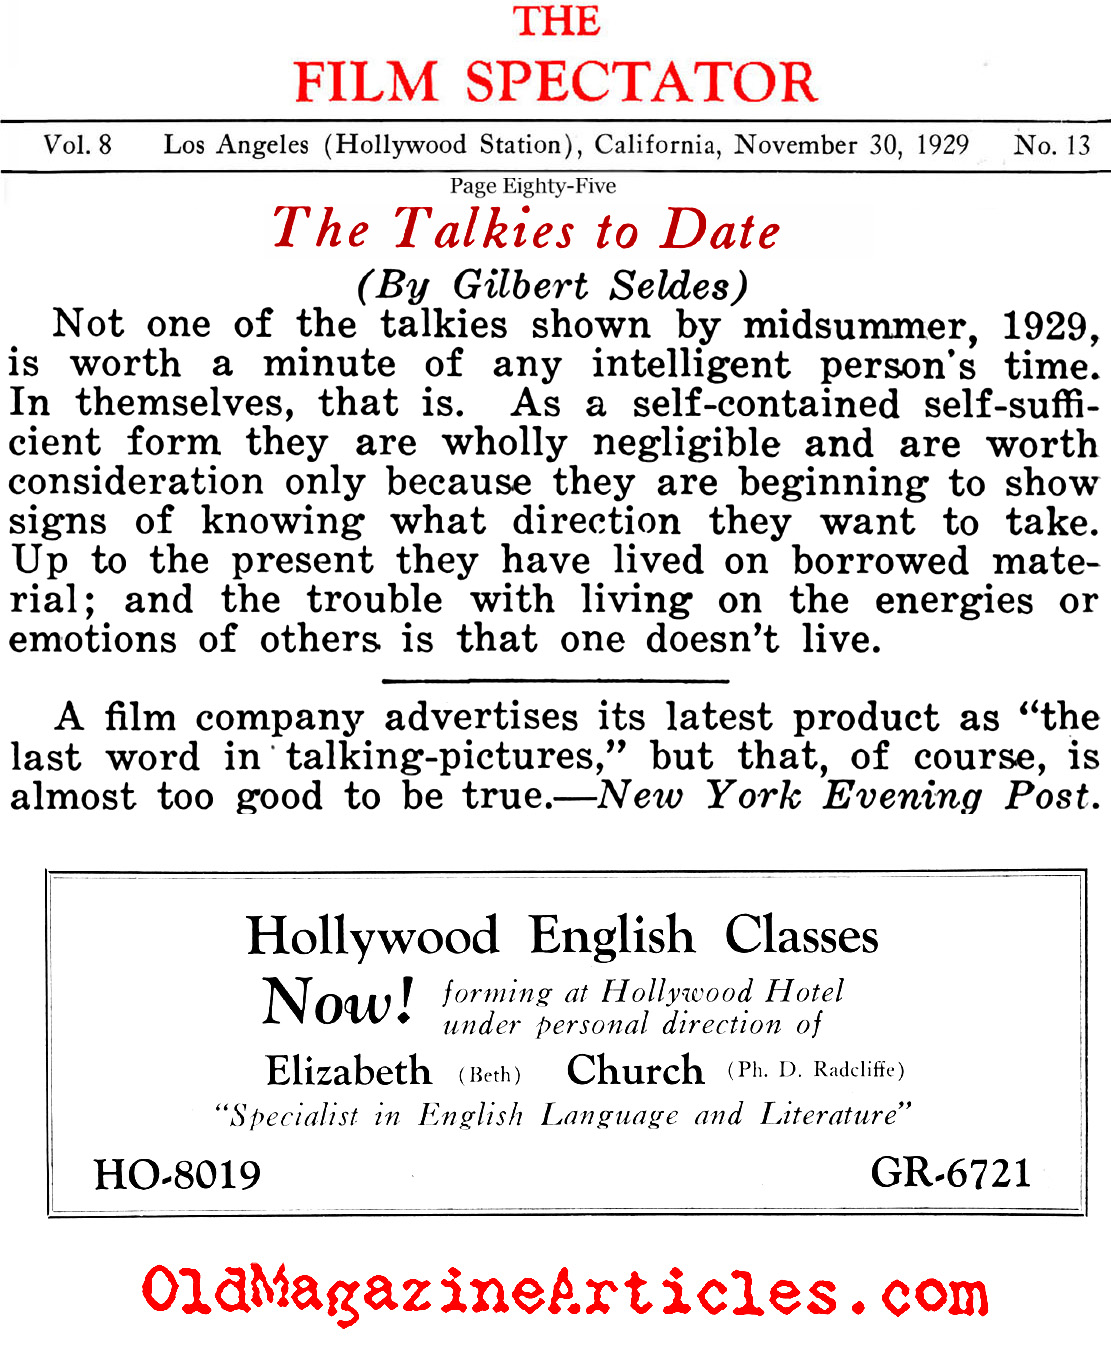 Talking Pictures Fail to Impress (Film Spectator, 1929)